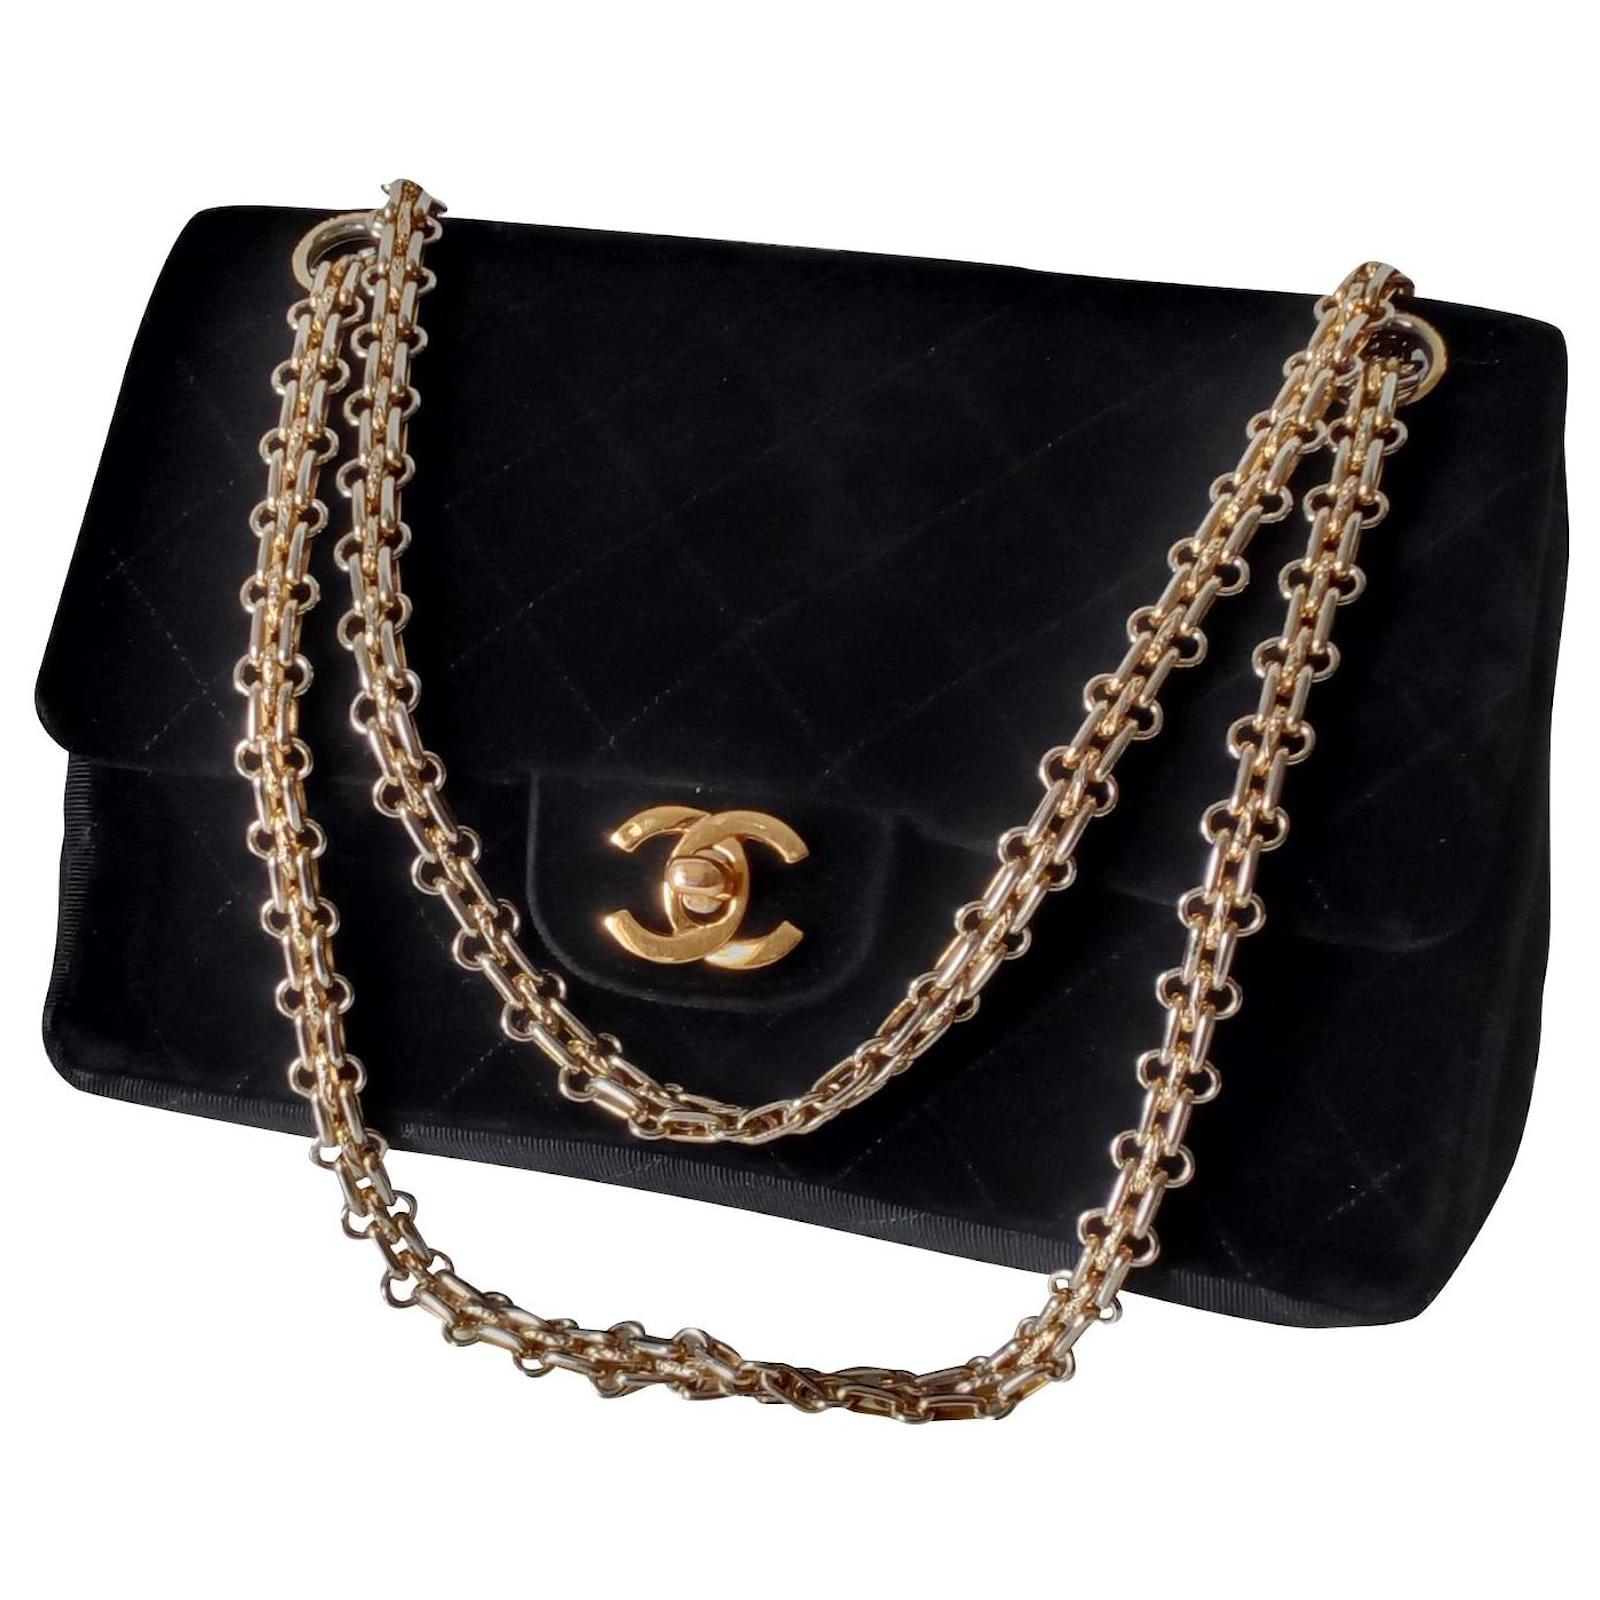 CHANEL JUMBO QUILTED SINGLE BLACK FLAP SHOULDER BAG  Still in fashion